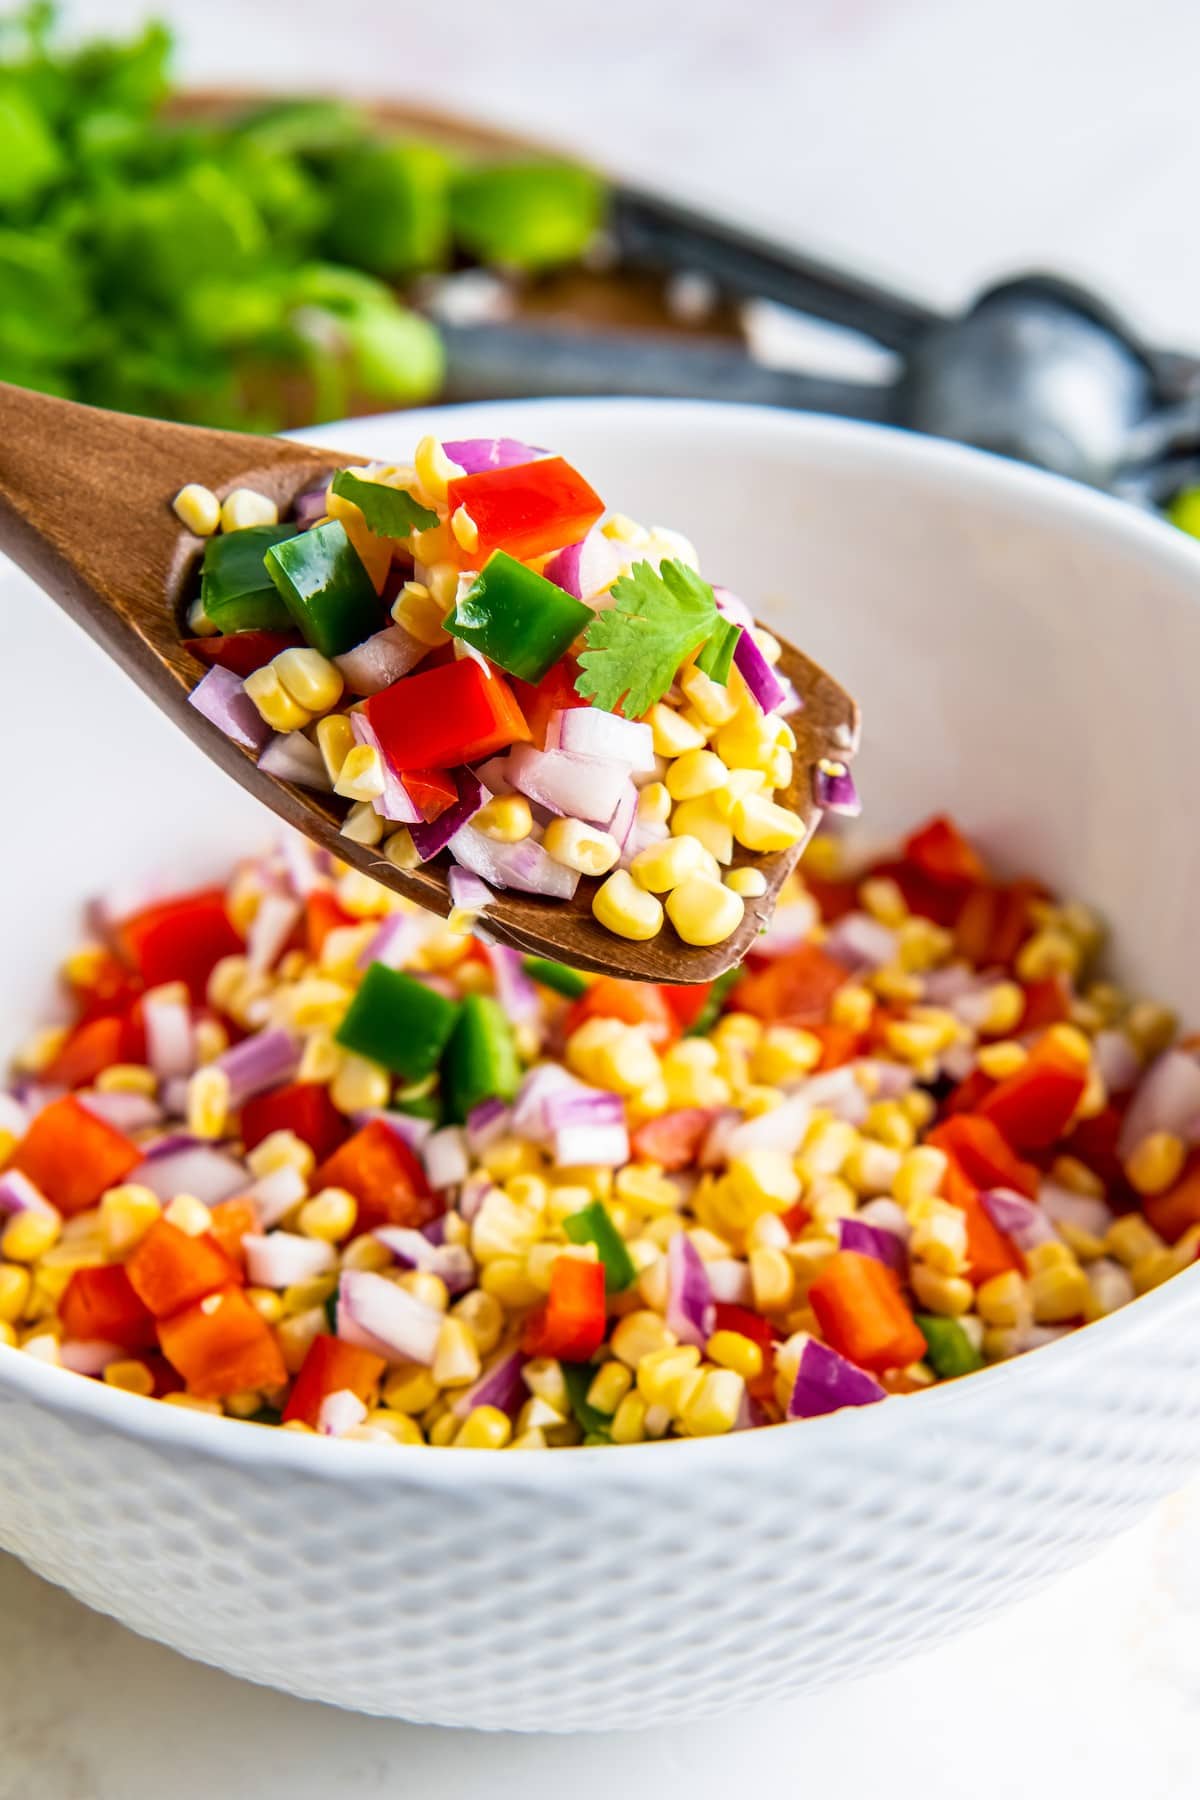 Spoonful of corn salsa with jalapeno pepper.